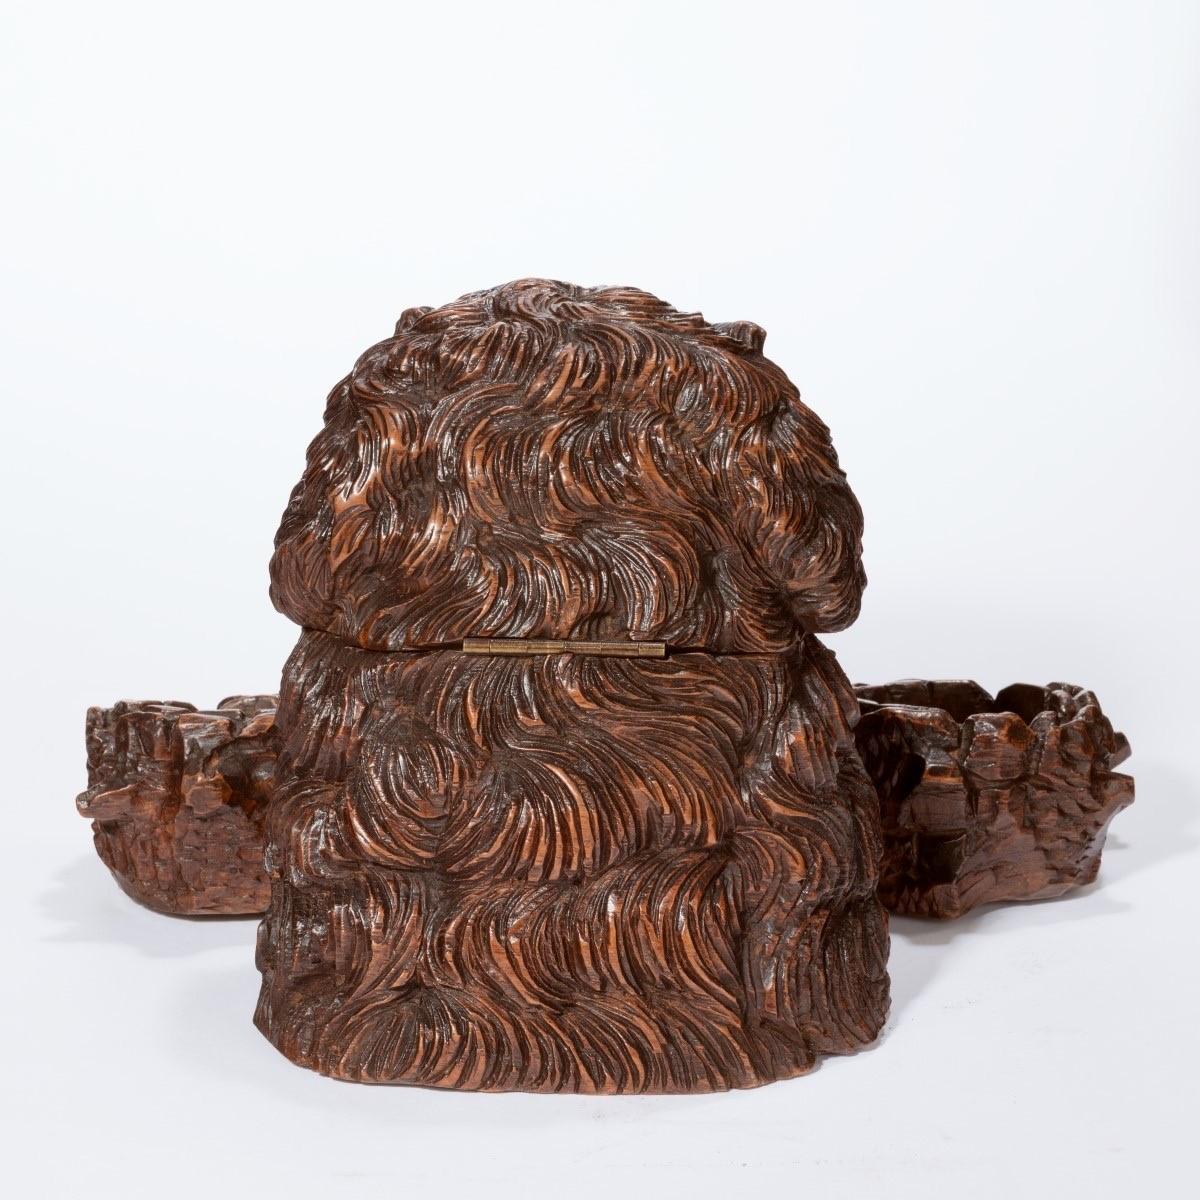 Late 19th Century ‘Black Forest’ Walnut Tobacco Box in the Form of a Long-Haired Dog